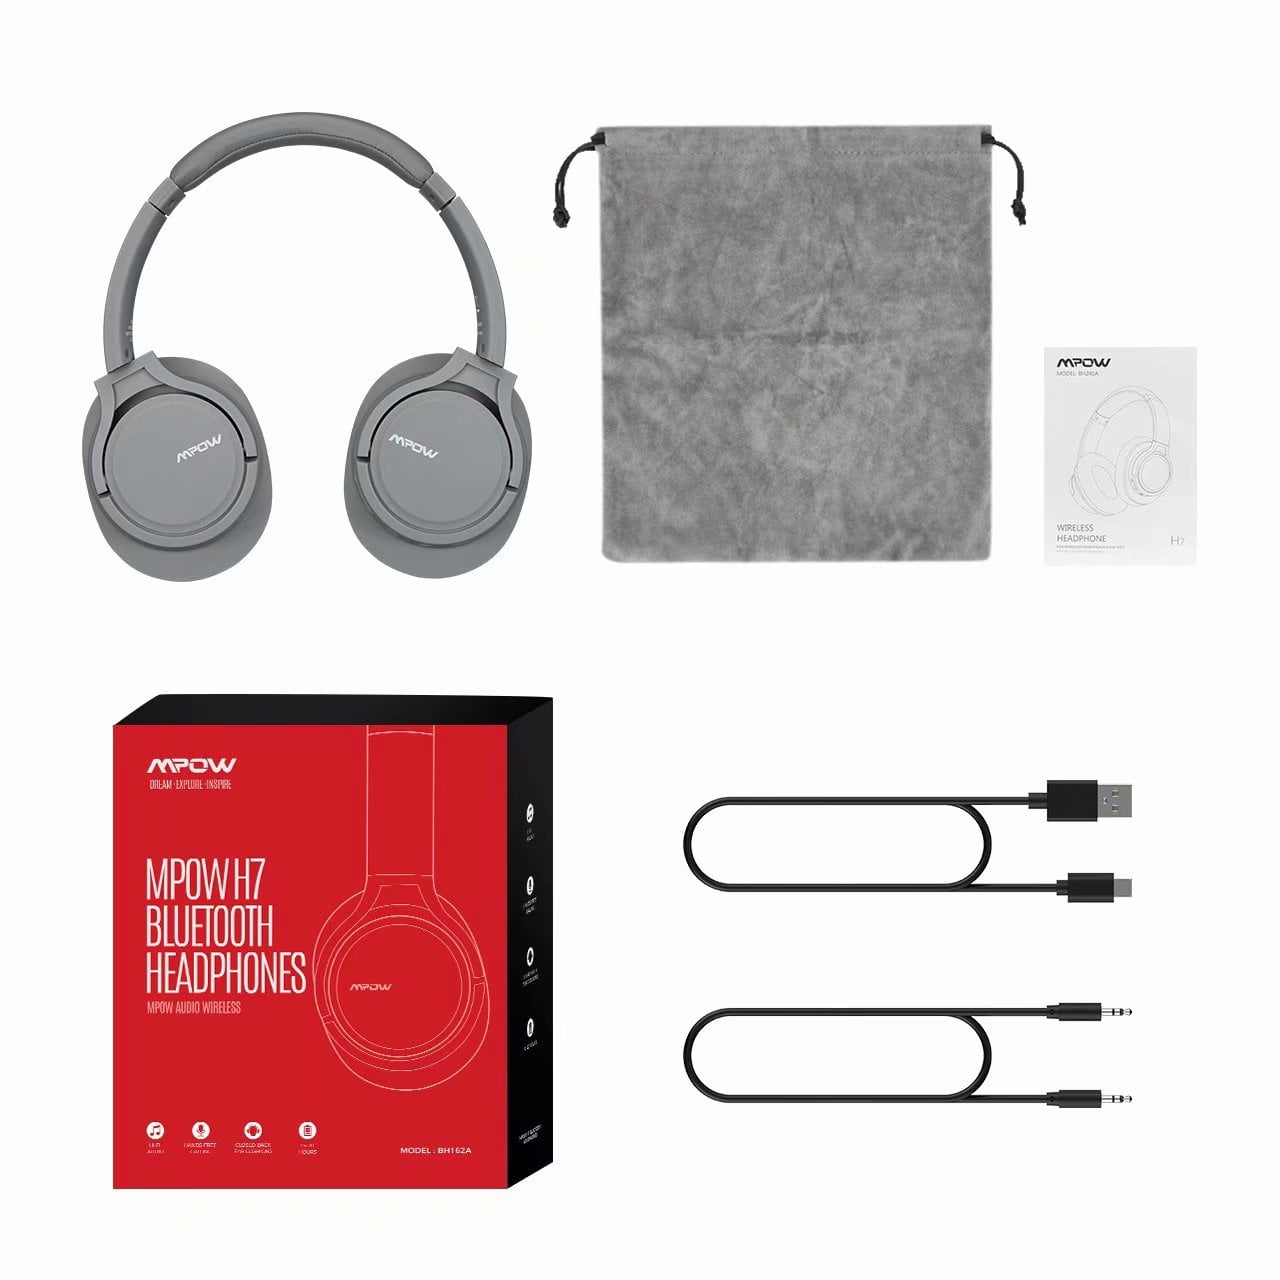 Mpow H7 Bluetooth Headphones Over Ear Stereo Wireless Headset With Microphone Comfortable Memory Protein Earpads 18 Hours Playtime Wired And Wireless Headphones For Cellphone Tablet Gray Walmart Com Walmart Com